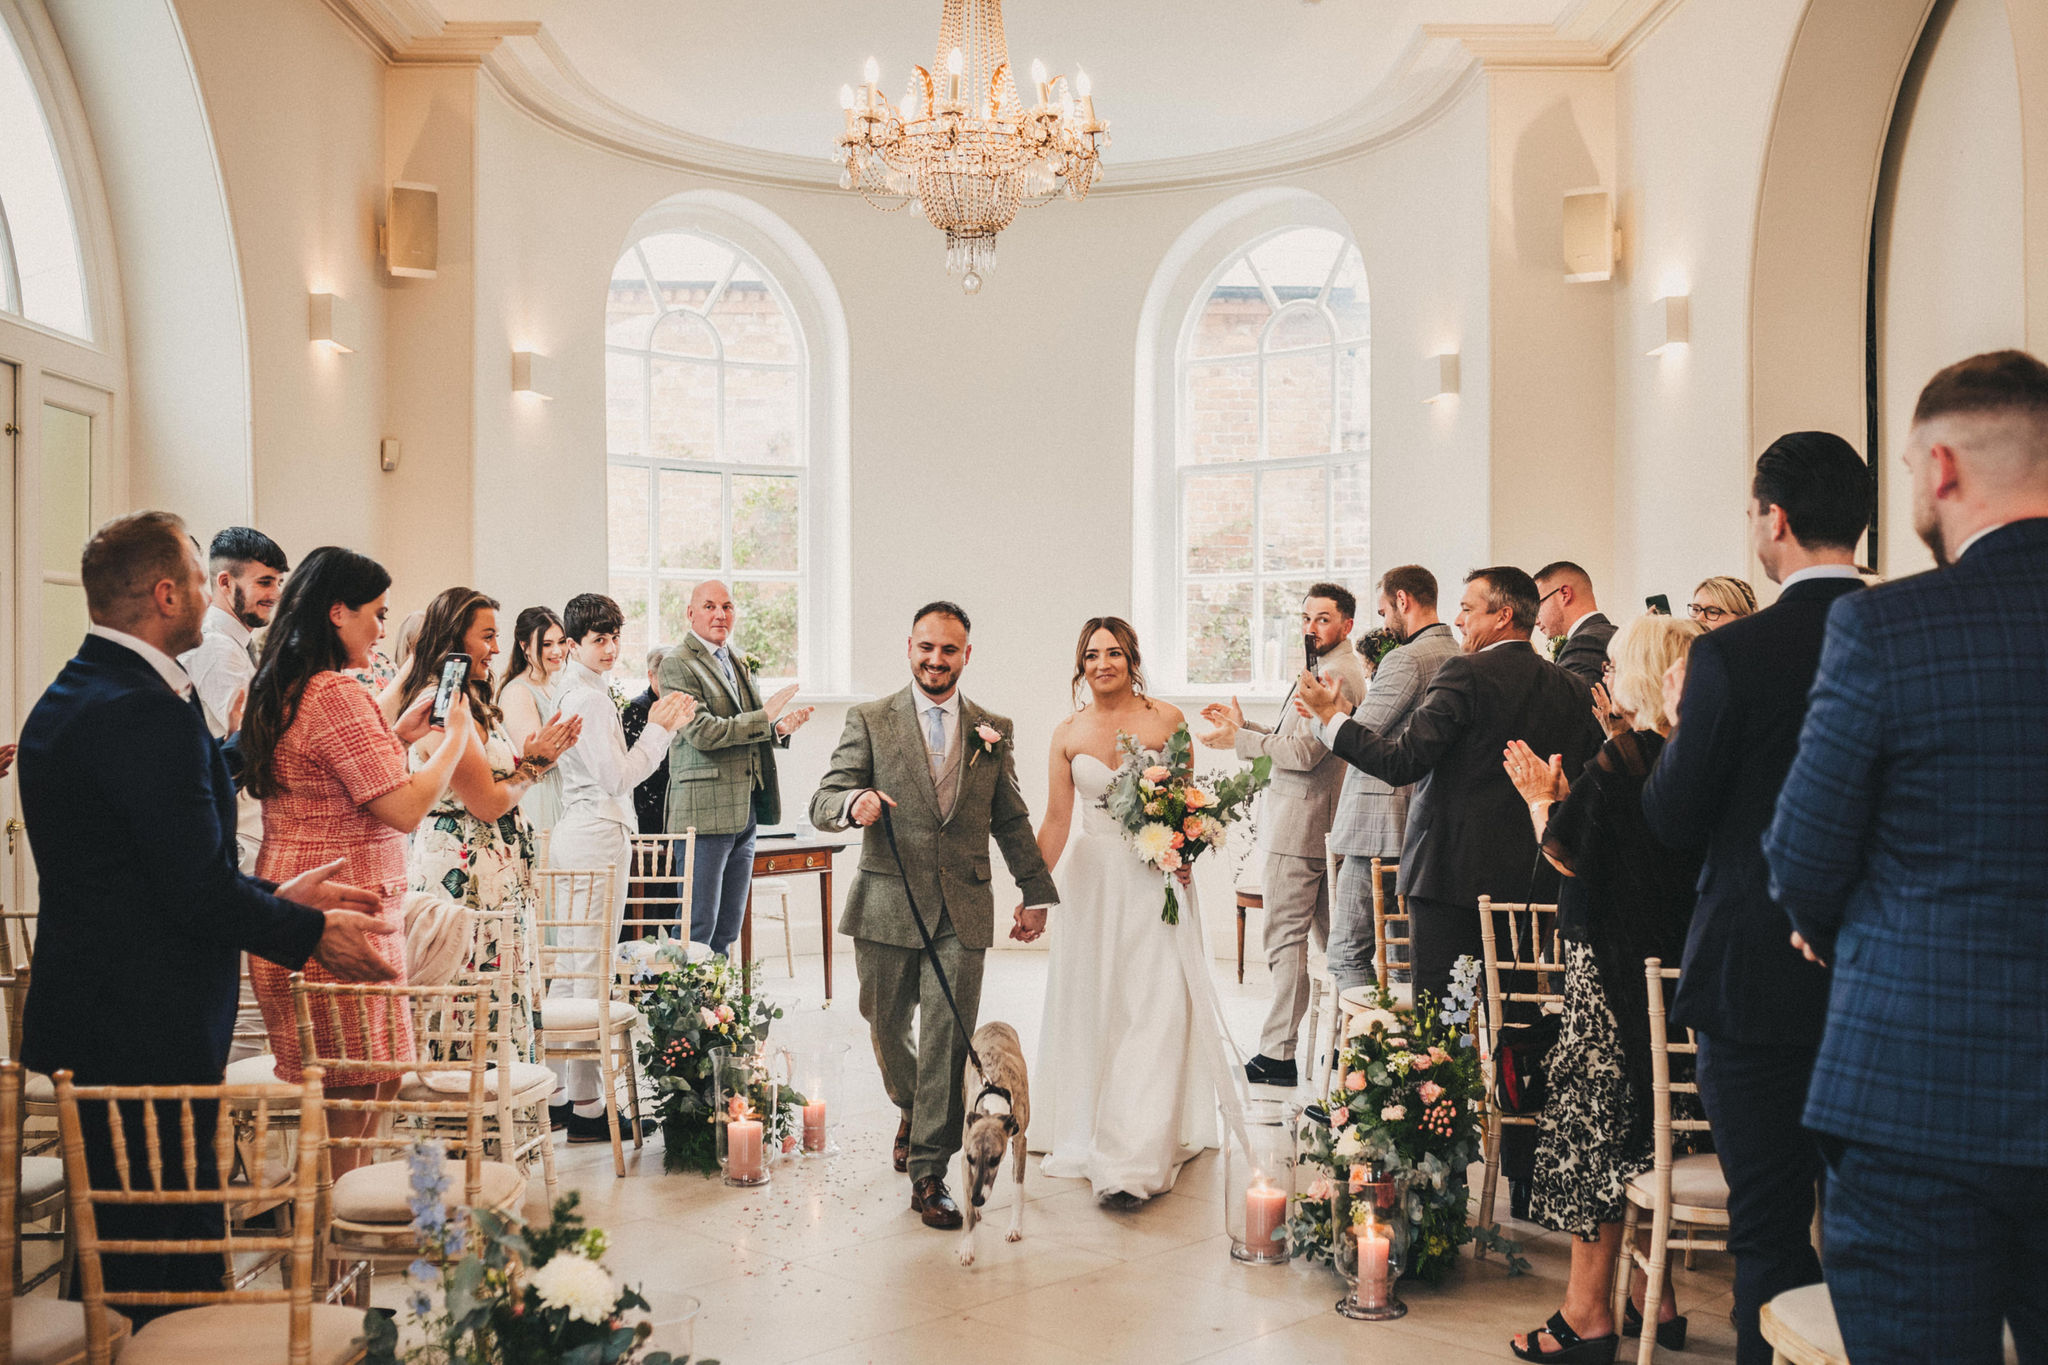 A bride and groom walk down the aisle in a white Georgian room with chandeliers with a whippet on a lead whilst their guests clap and cheer